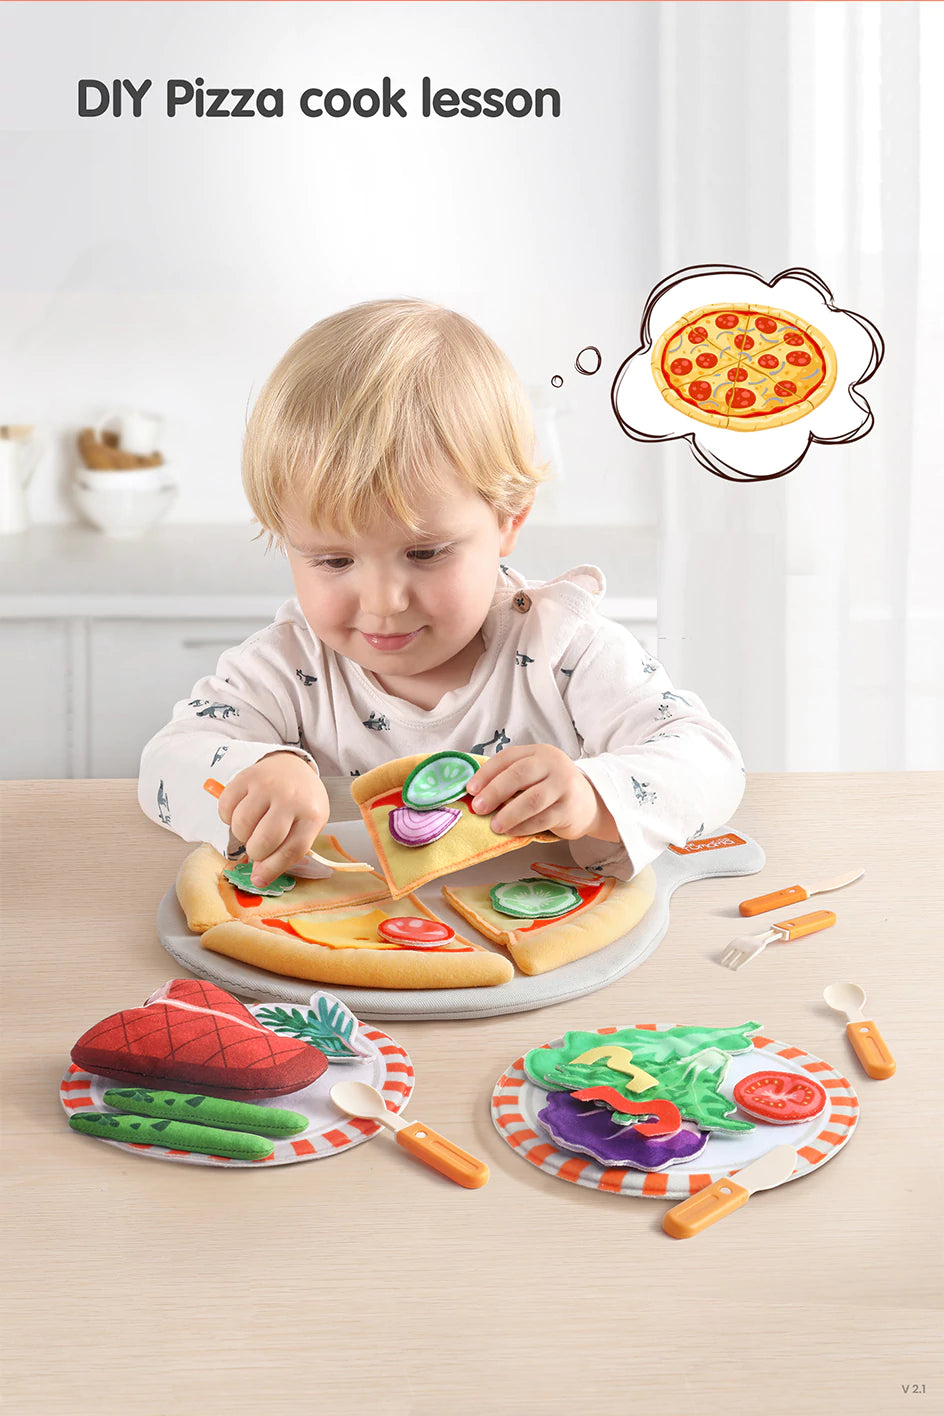 Pizza salad and steak food play set with simulation features